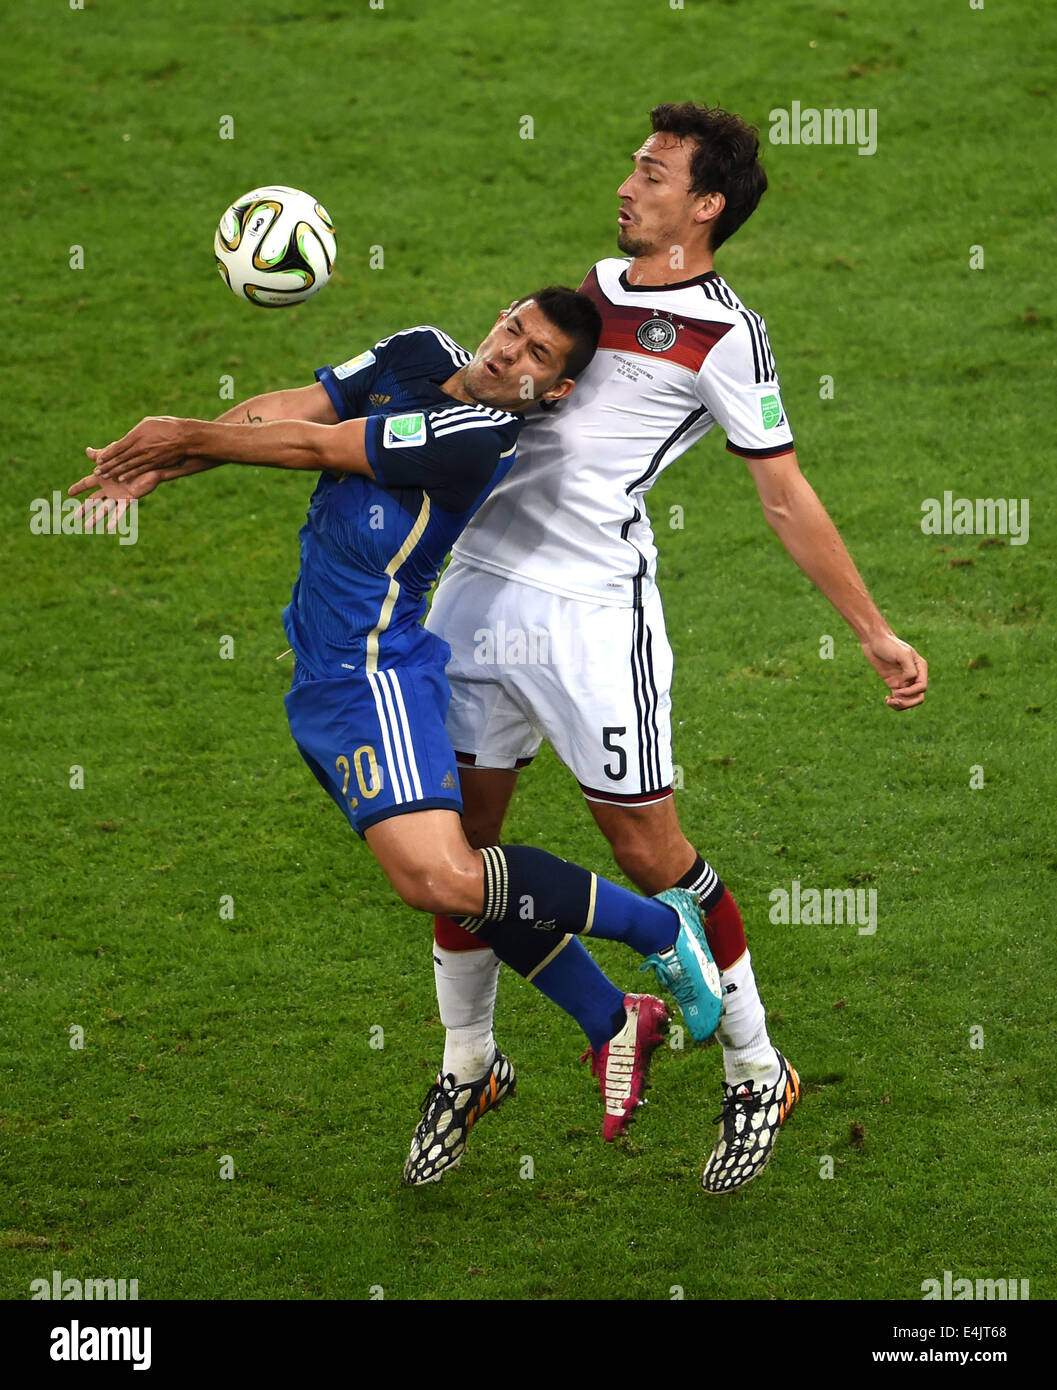 Rio De Janeiro, Brazil. 13th July, 2014. Germany's Mats Hummels competes for a header with Argentina's Sergio Aguero during the final match between Germany and Argentina of 2014 FIFA World Cup at the Estadio do Maracana Stadium in Rio de Janeiro, Brazil, on July 13, 2014. Credit:  Li Ga/Xinhua/Alamy Live News Stock Photo